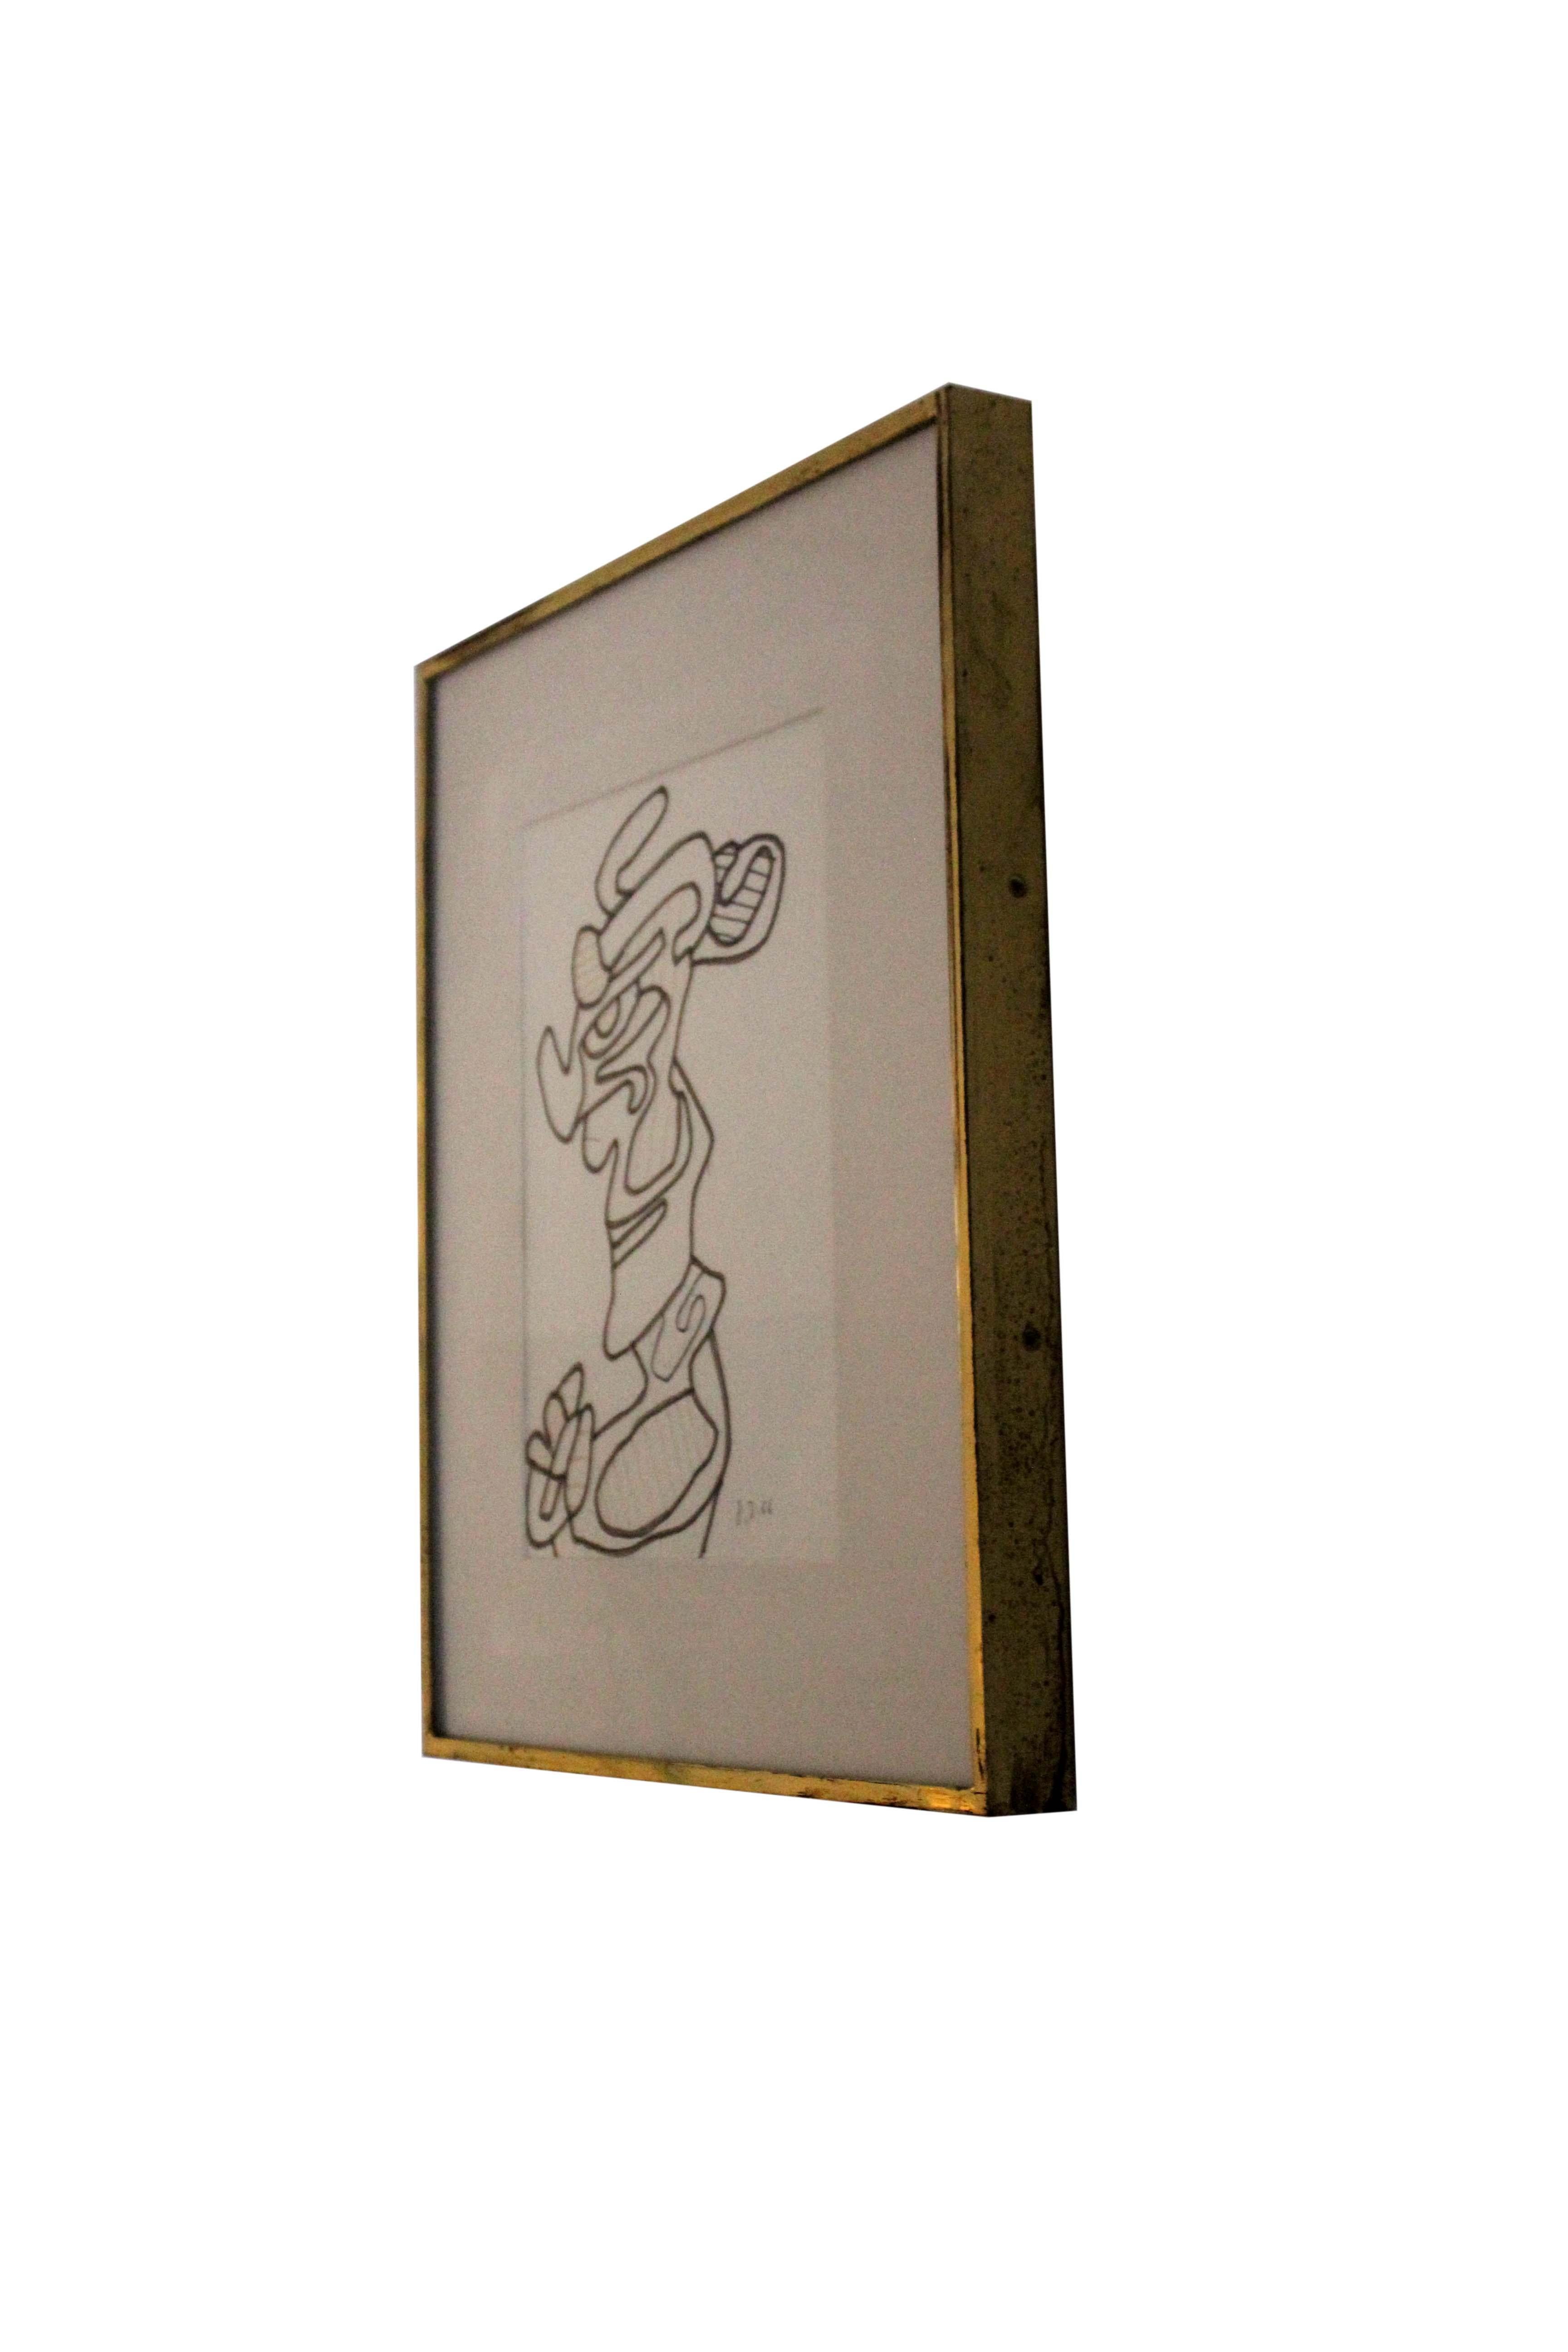 Jean Dubuffet Tete I Signed Felt Pen Drawing on Paper Art Brut Framed 1966 In Good Condition In Keego Harbor, MI